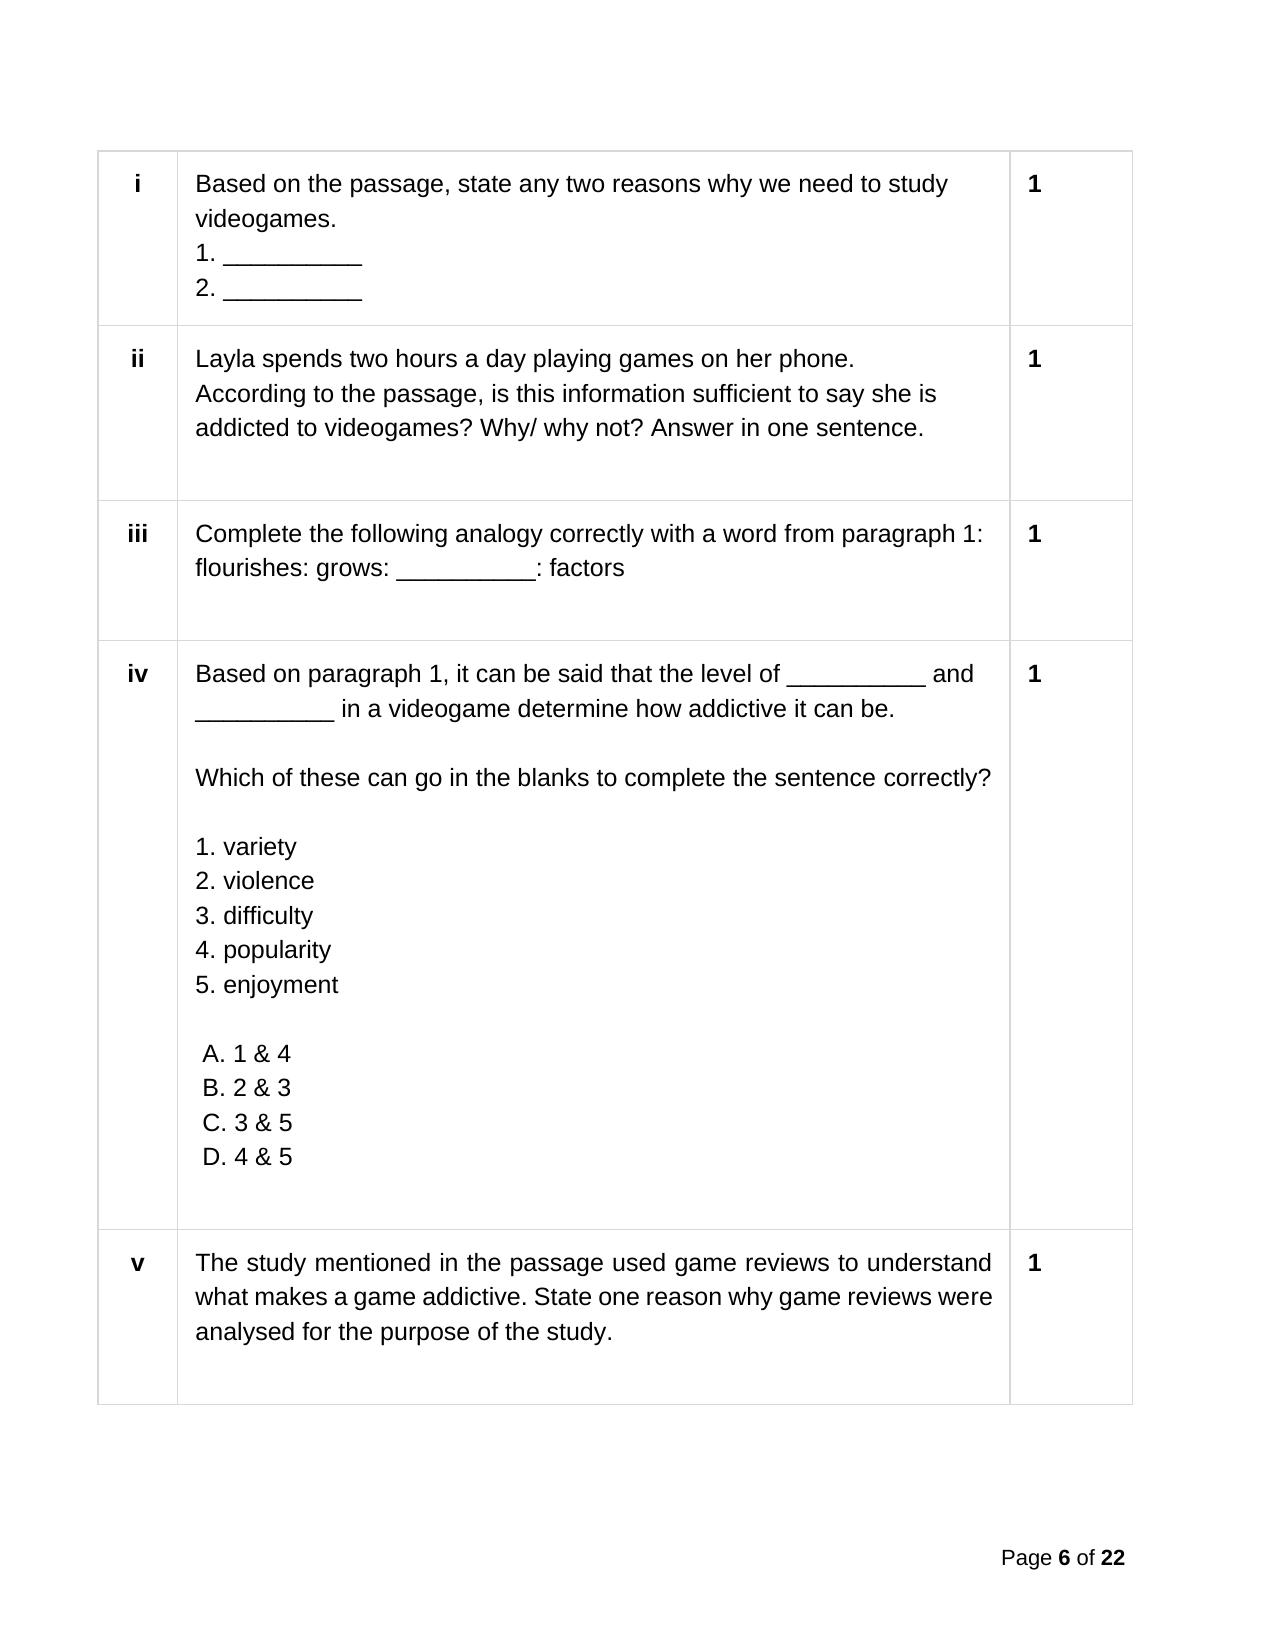 CBSE Class 10 English Practice Questions 2022-23 - Page 6